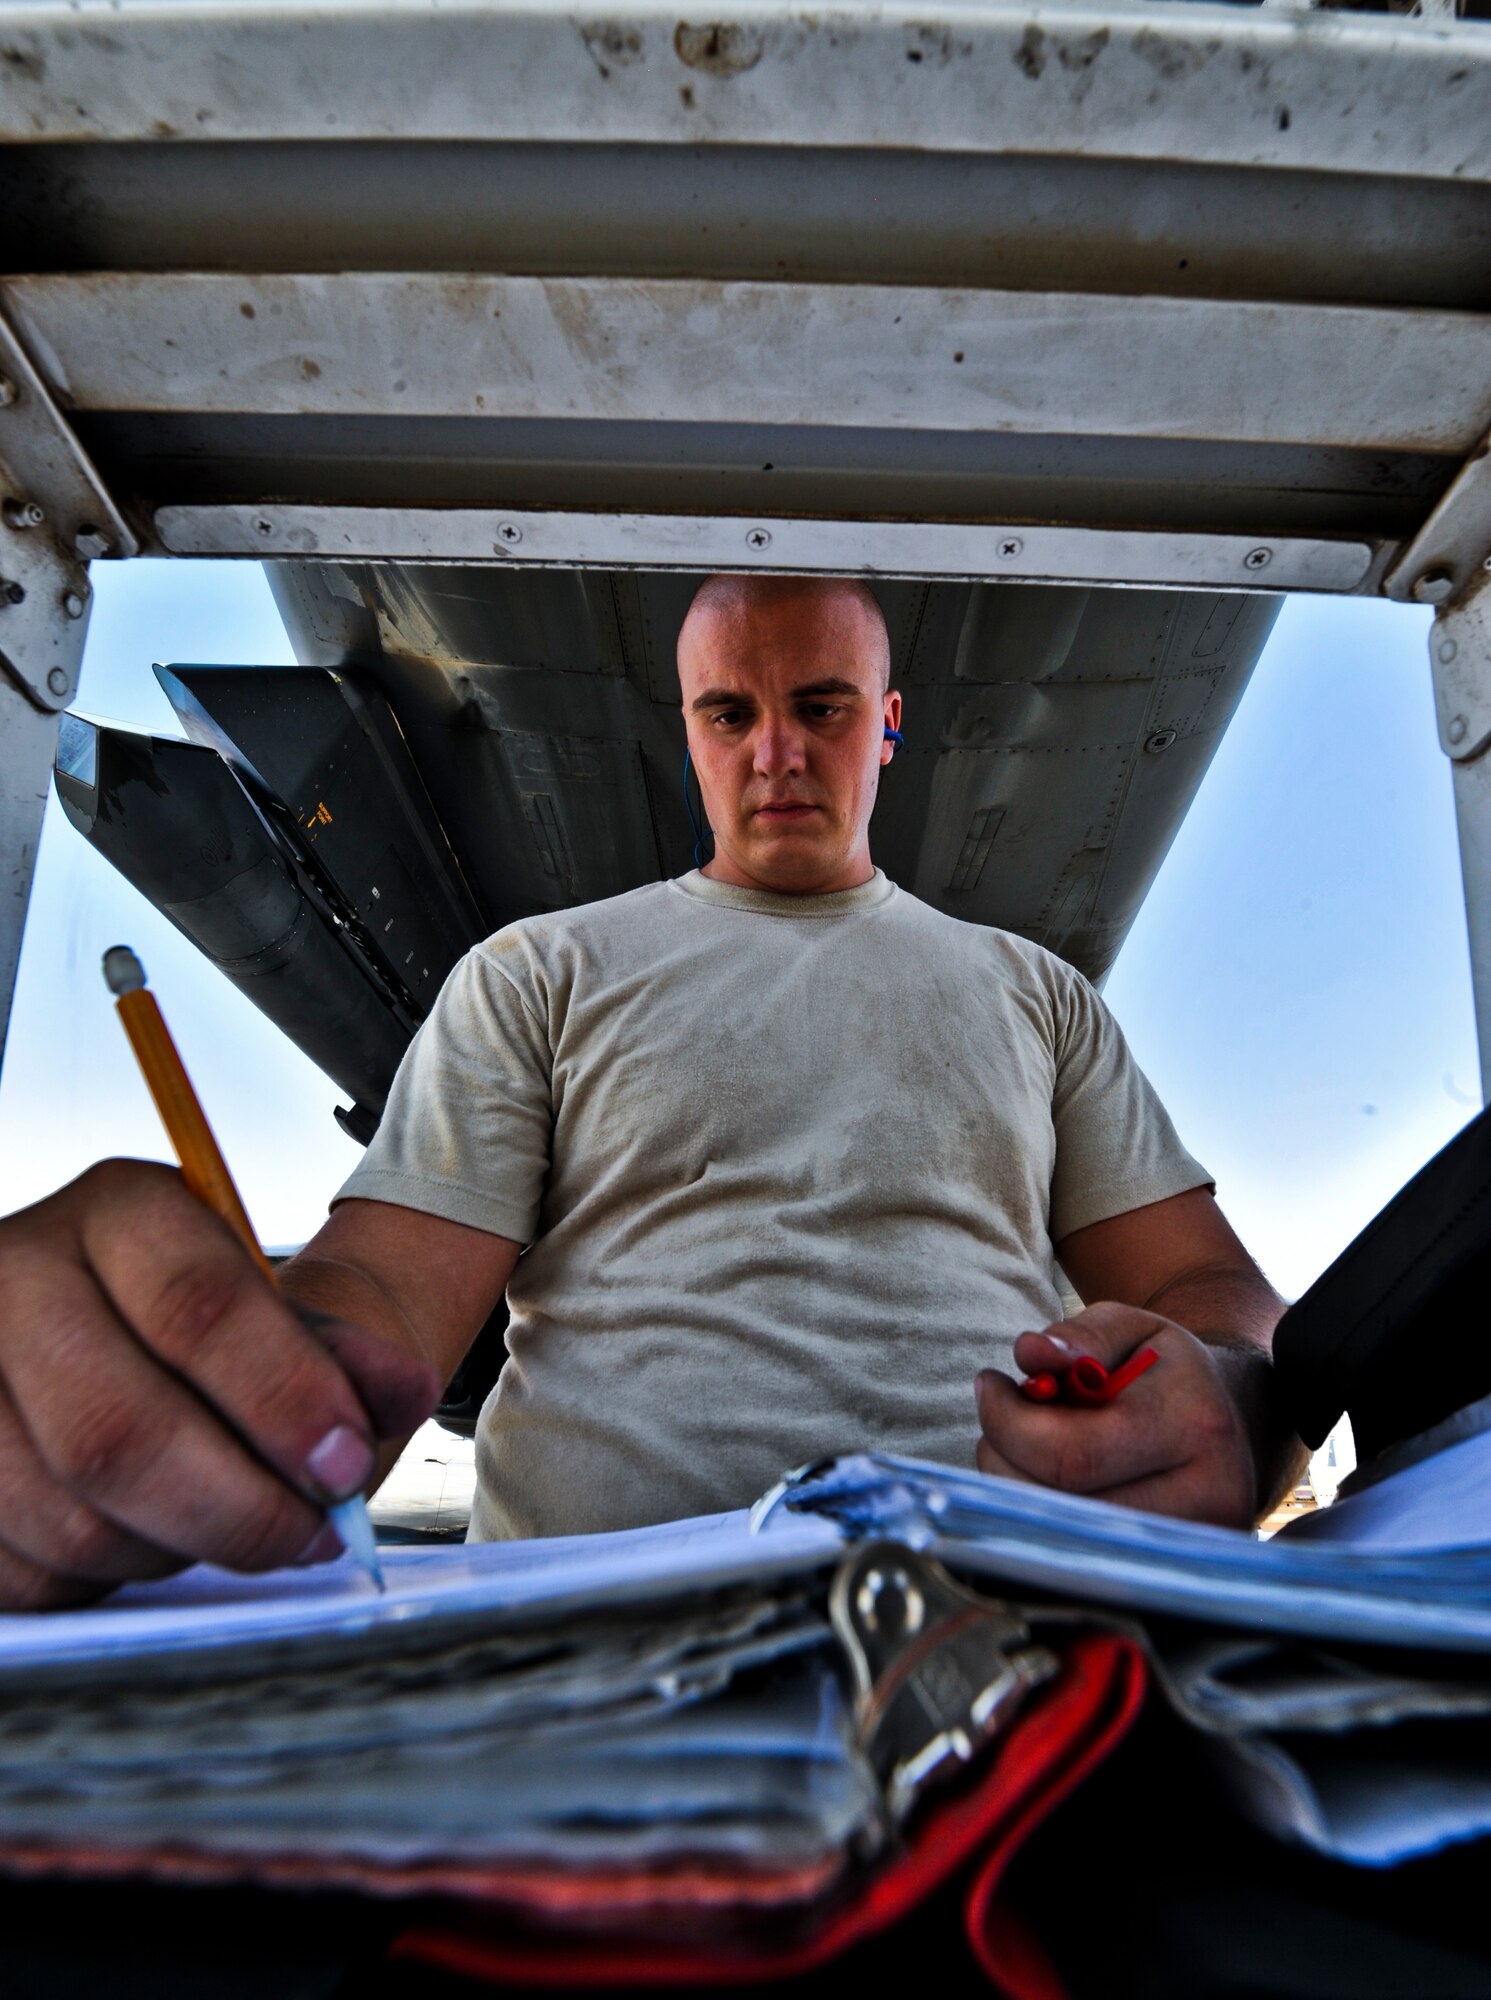 SOUTHWEST ASIA -- Staff Sgt. Carter Norrie, 34th Aircraft Maintenance Unit weapons load team chief, completes a post munitions load checklist, Sept. 14, 2011, at an undisclosed location in Southwest Asia. Norrie, a native of Kenmare, N.D., is deployed from Ellsworth Air Force Base, S.D. (U.S. Air Force photo/Senior Airman Paul Labbe)